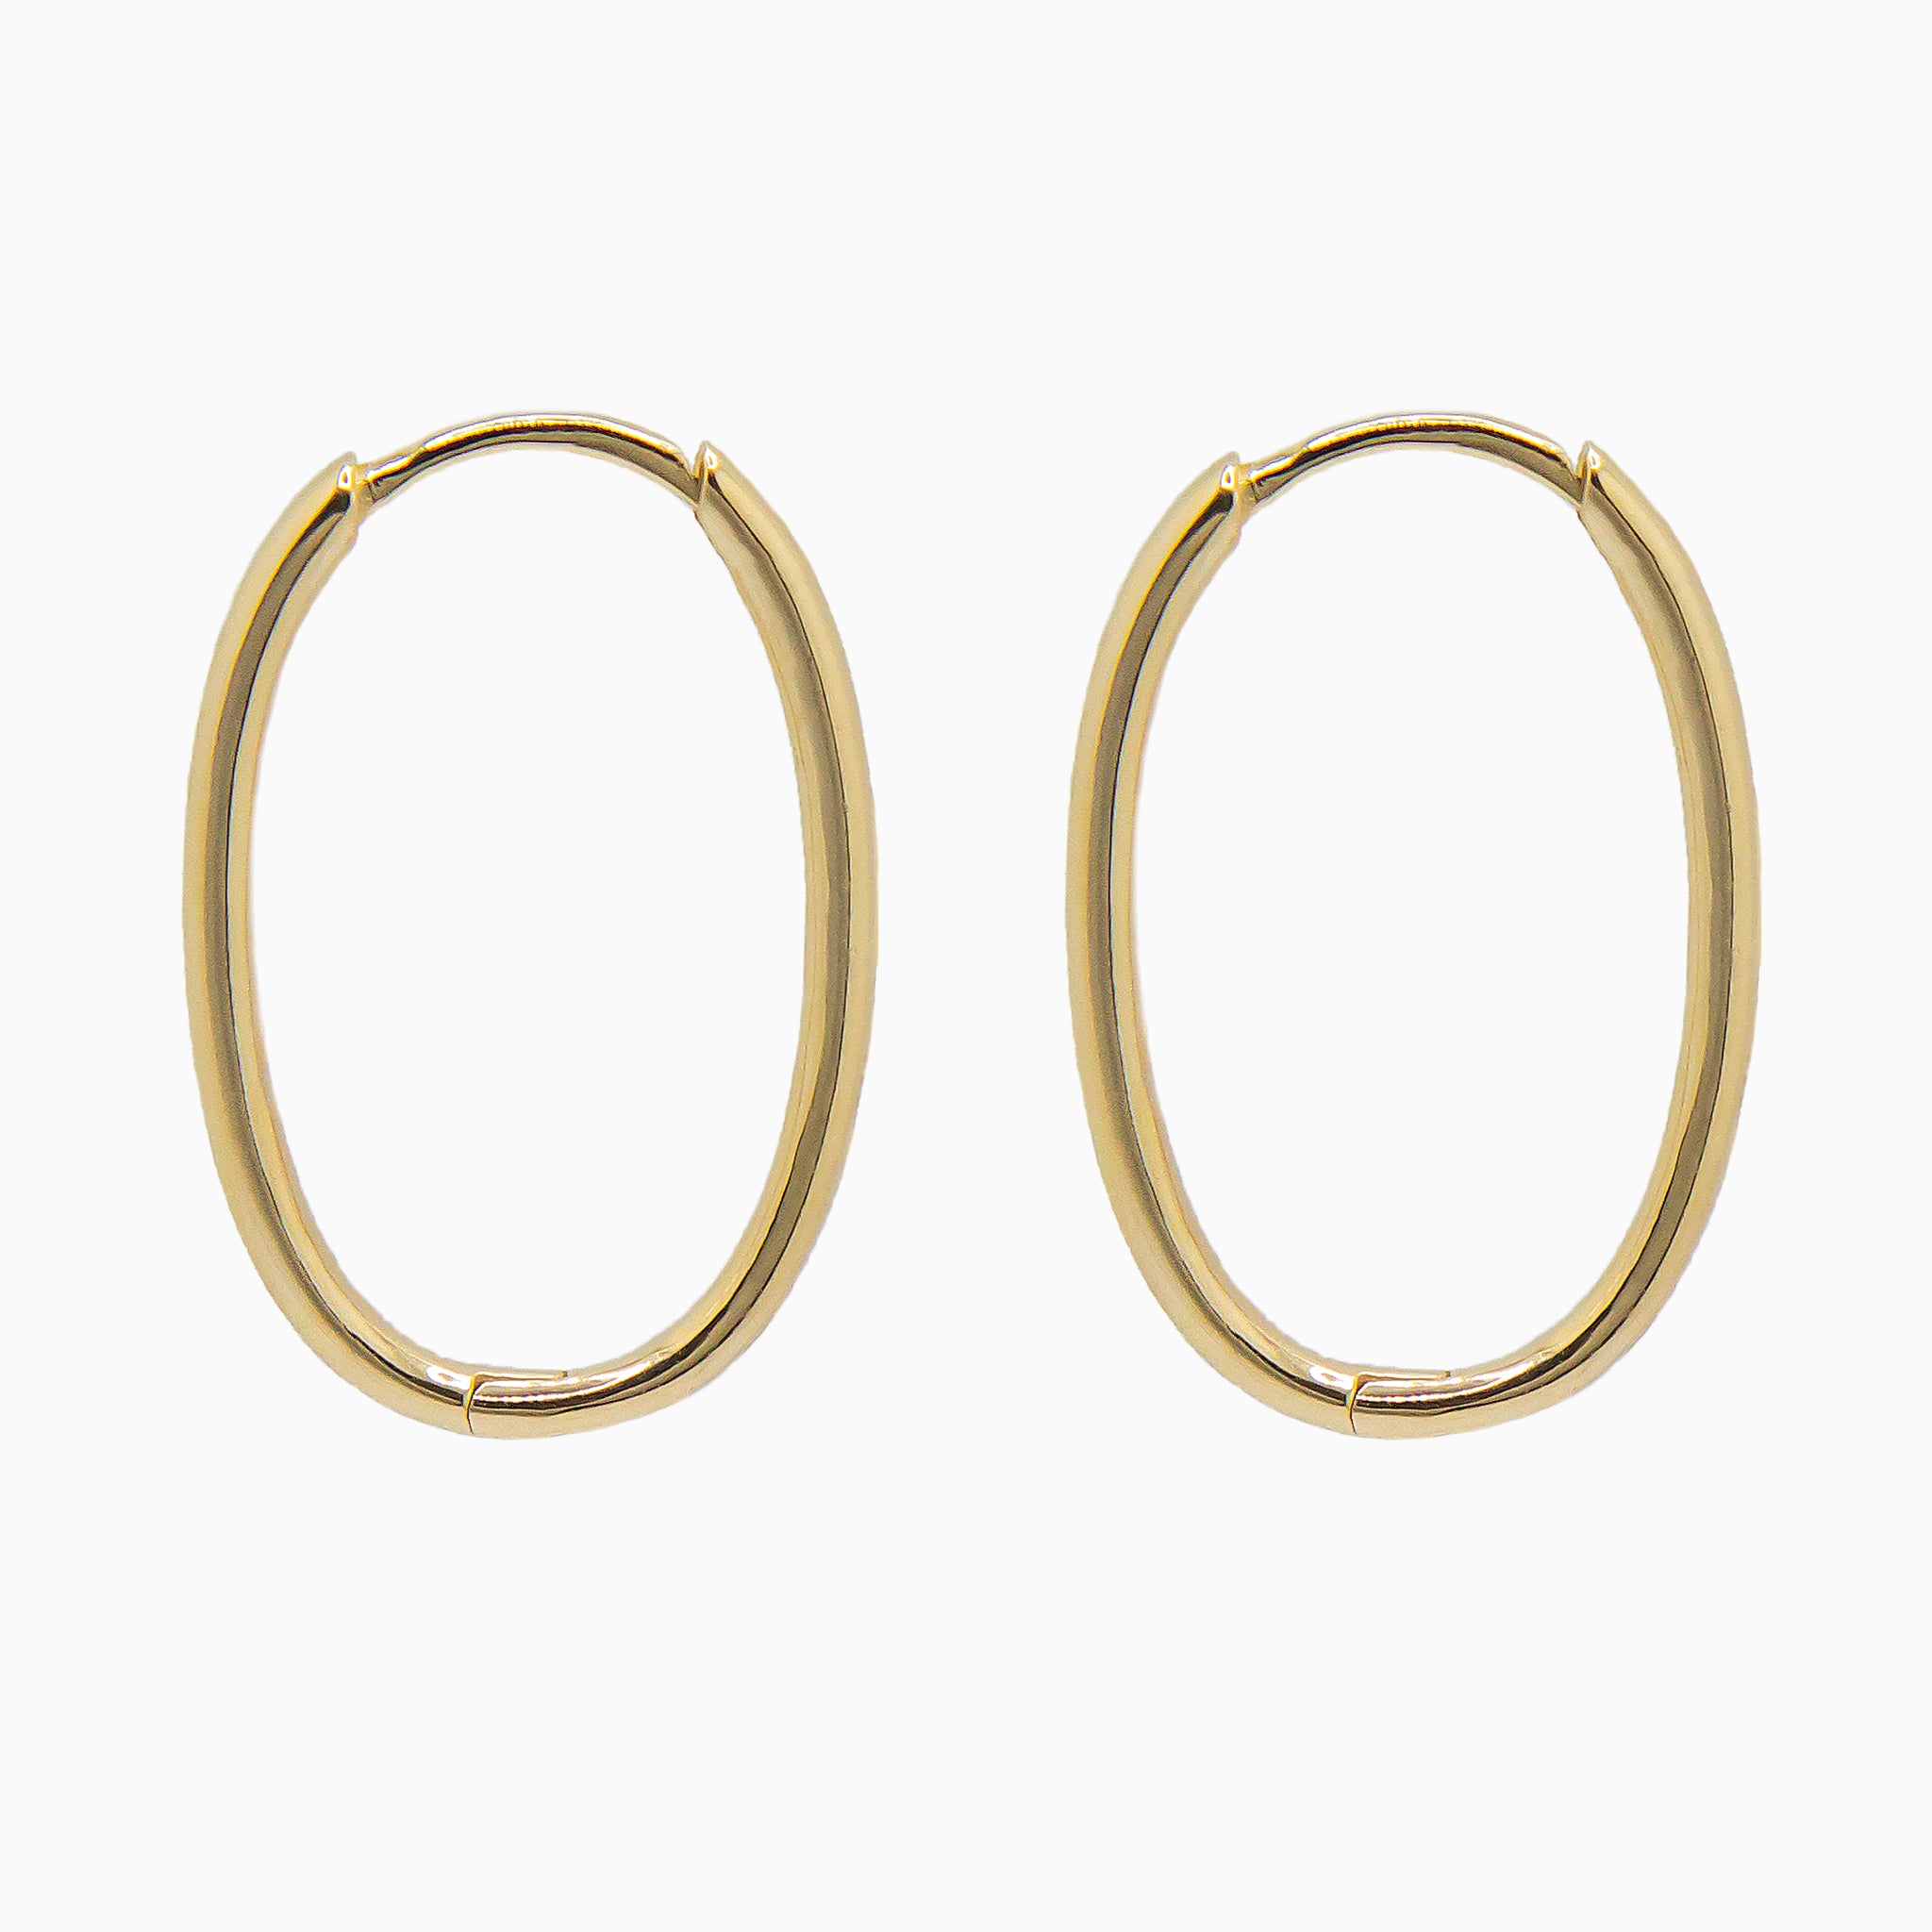 14k Yellow Gold 23mm x 15mm Hinged Everyday Oval Hoop Earrings, Side View